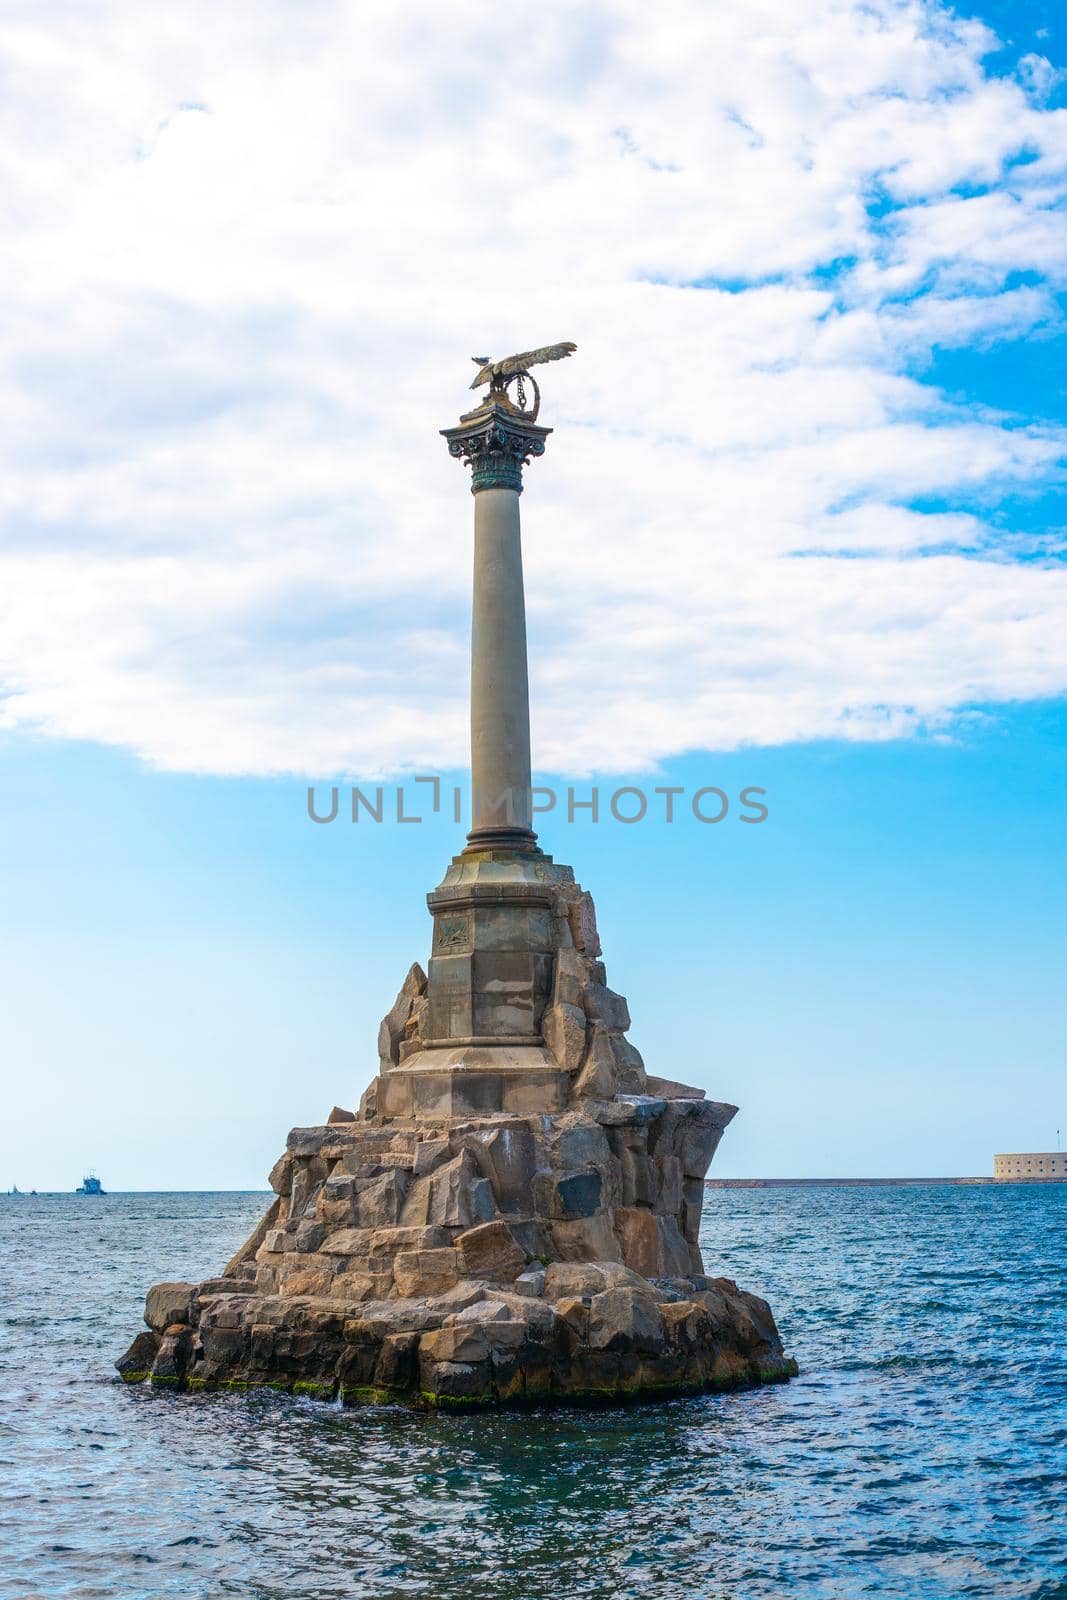 Monument to the Scuttled Ships by levnat09